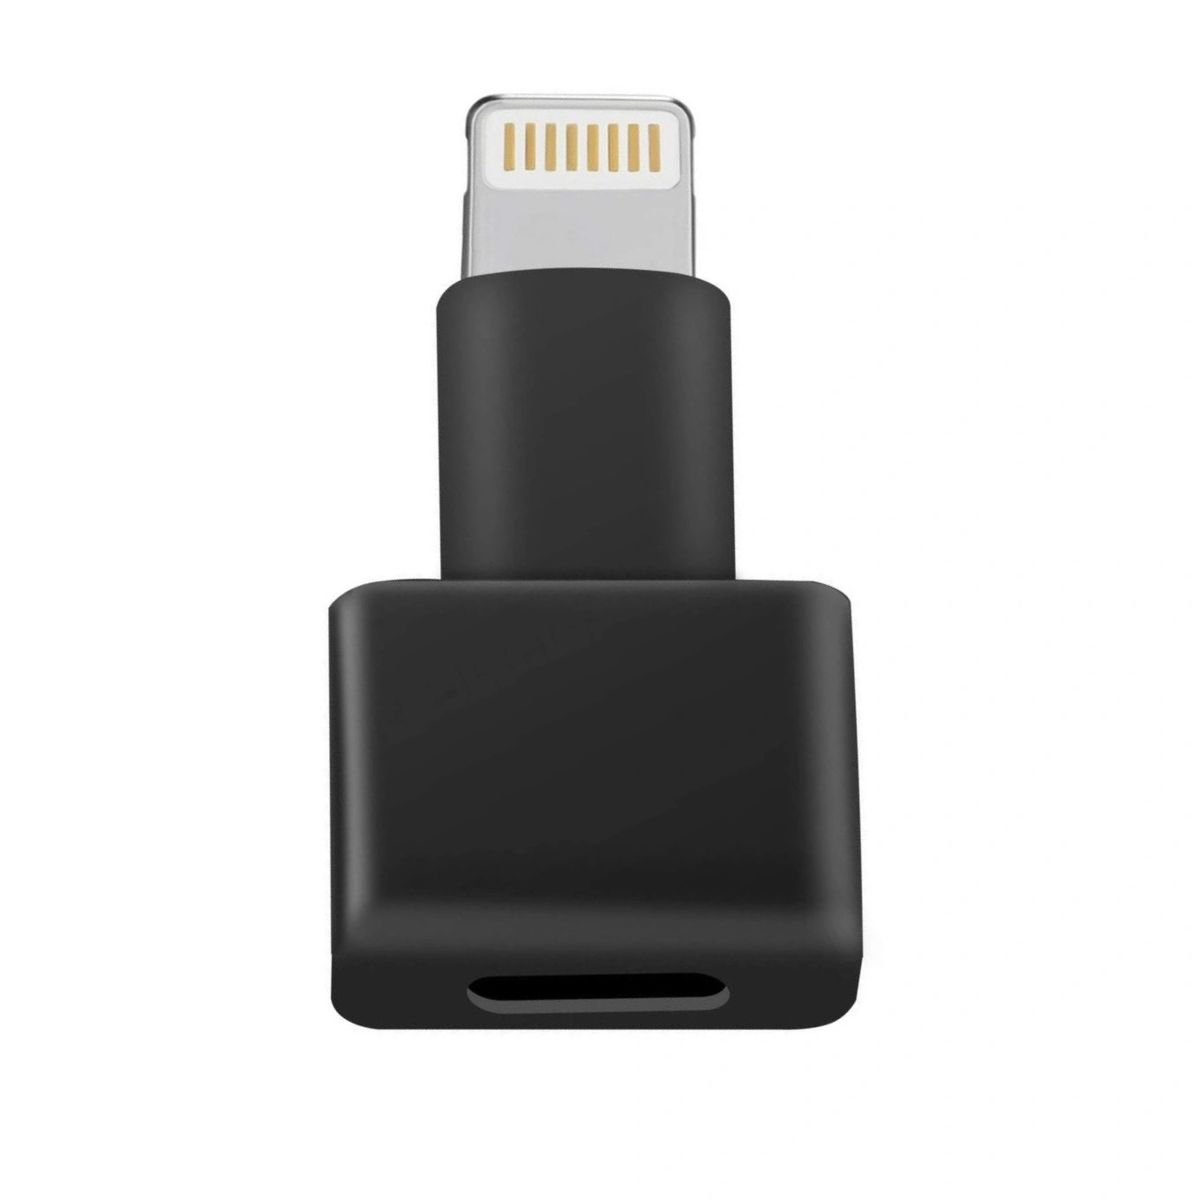 KOKKIA Lightning_Extender : Male to Female Lightning Extender Adapter,  Compatible with iPhone, iPad, iPod with 8-pin